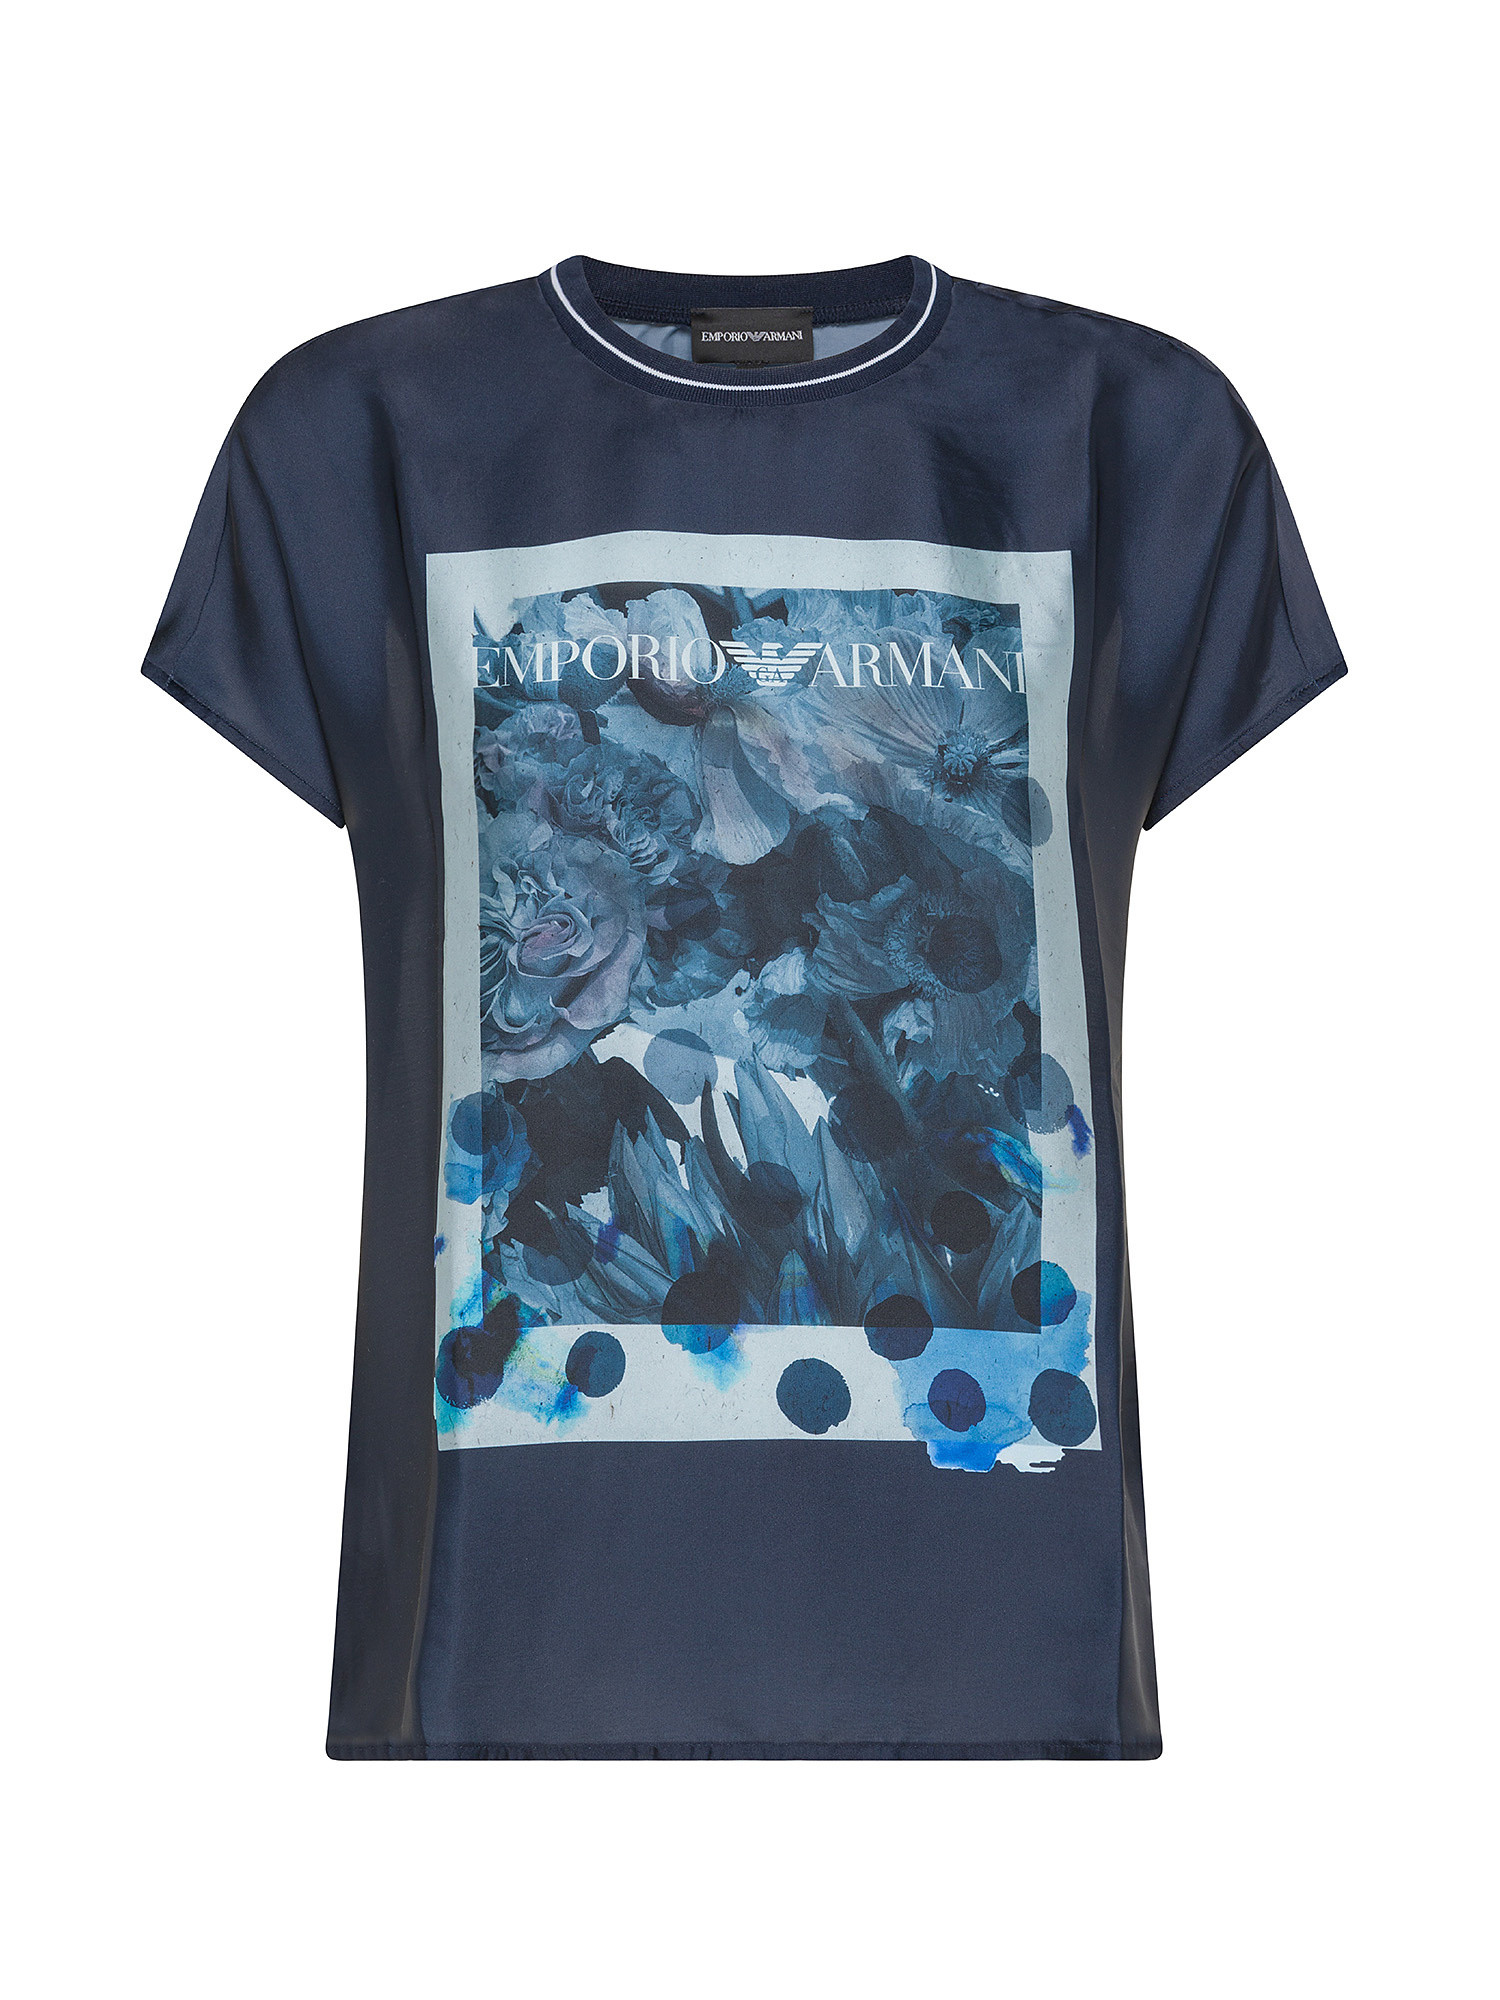 Emporio Armani - T-shirt with maxi print, Dark Blue, large image number 0